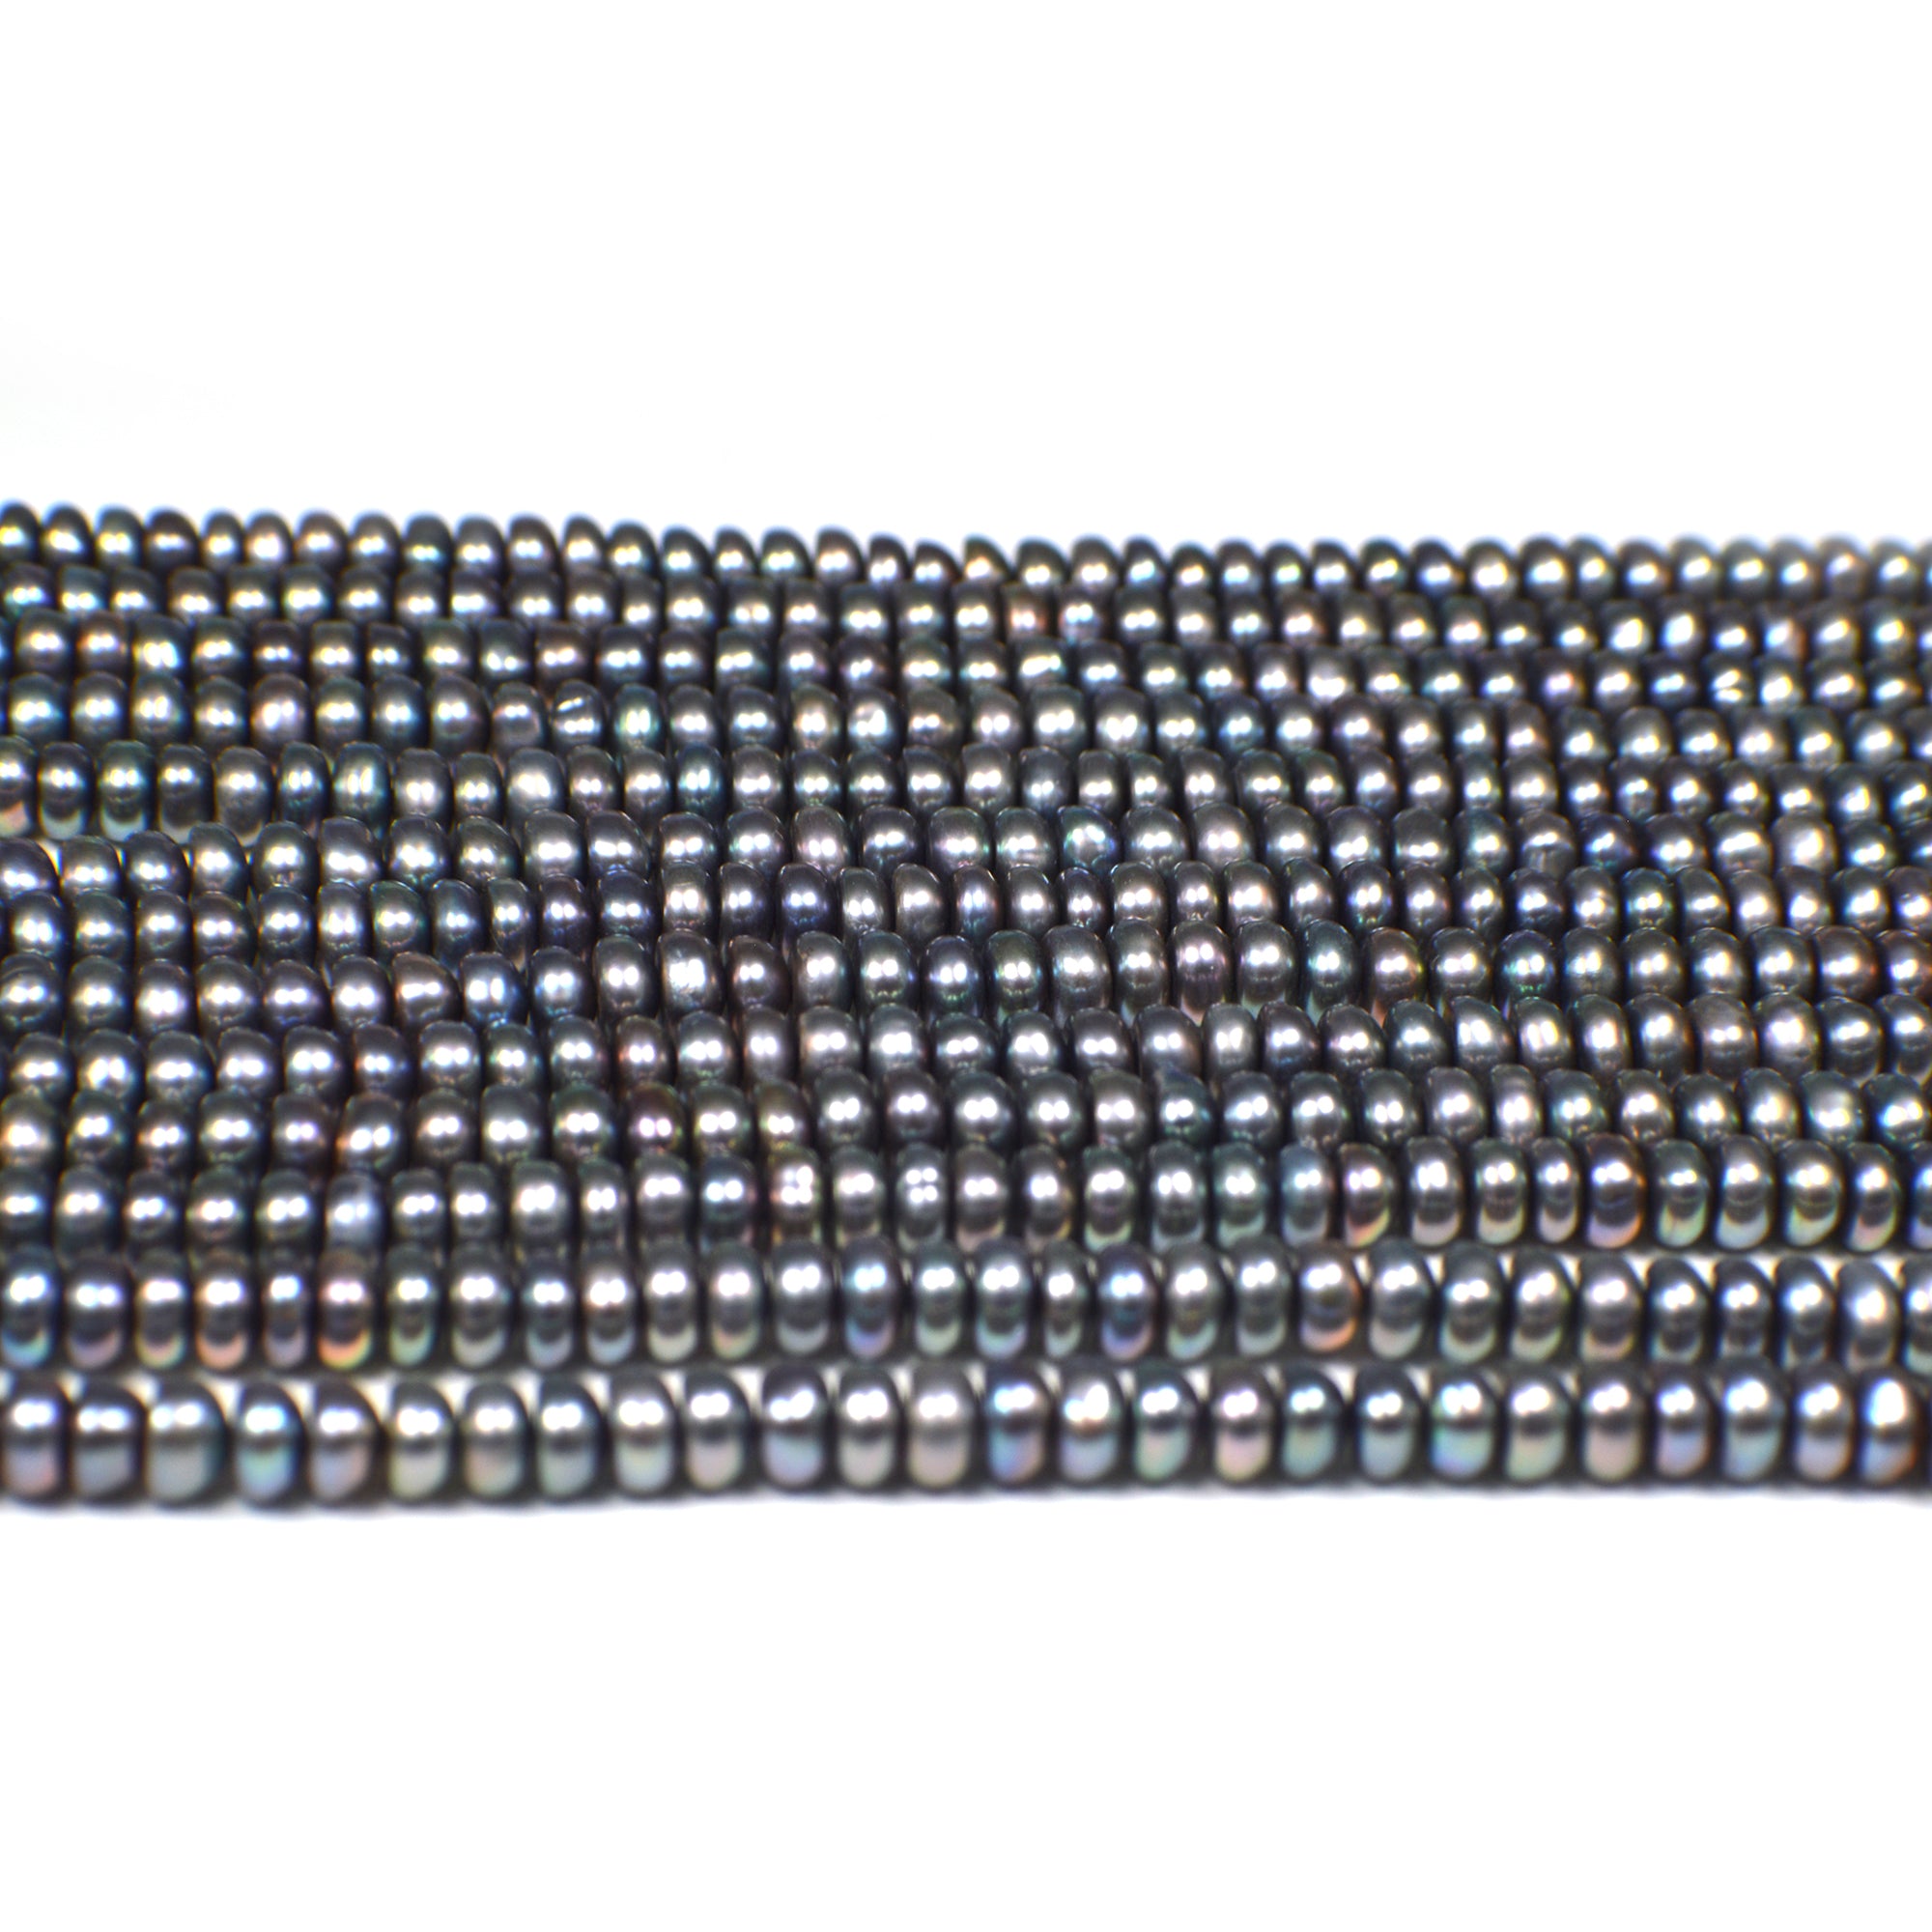 5 - 5.5 MM Peacock Navy Blue Button Freshwater Pearls Beads